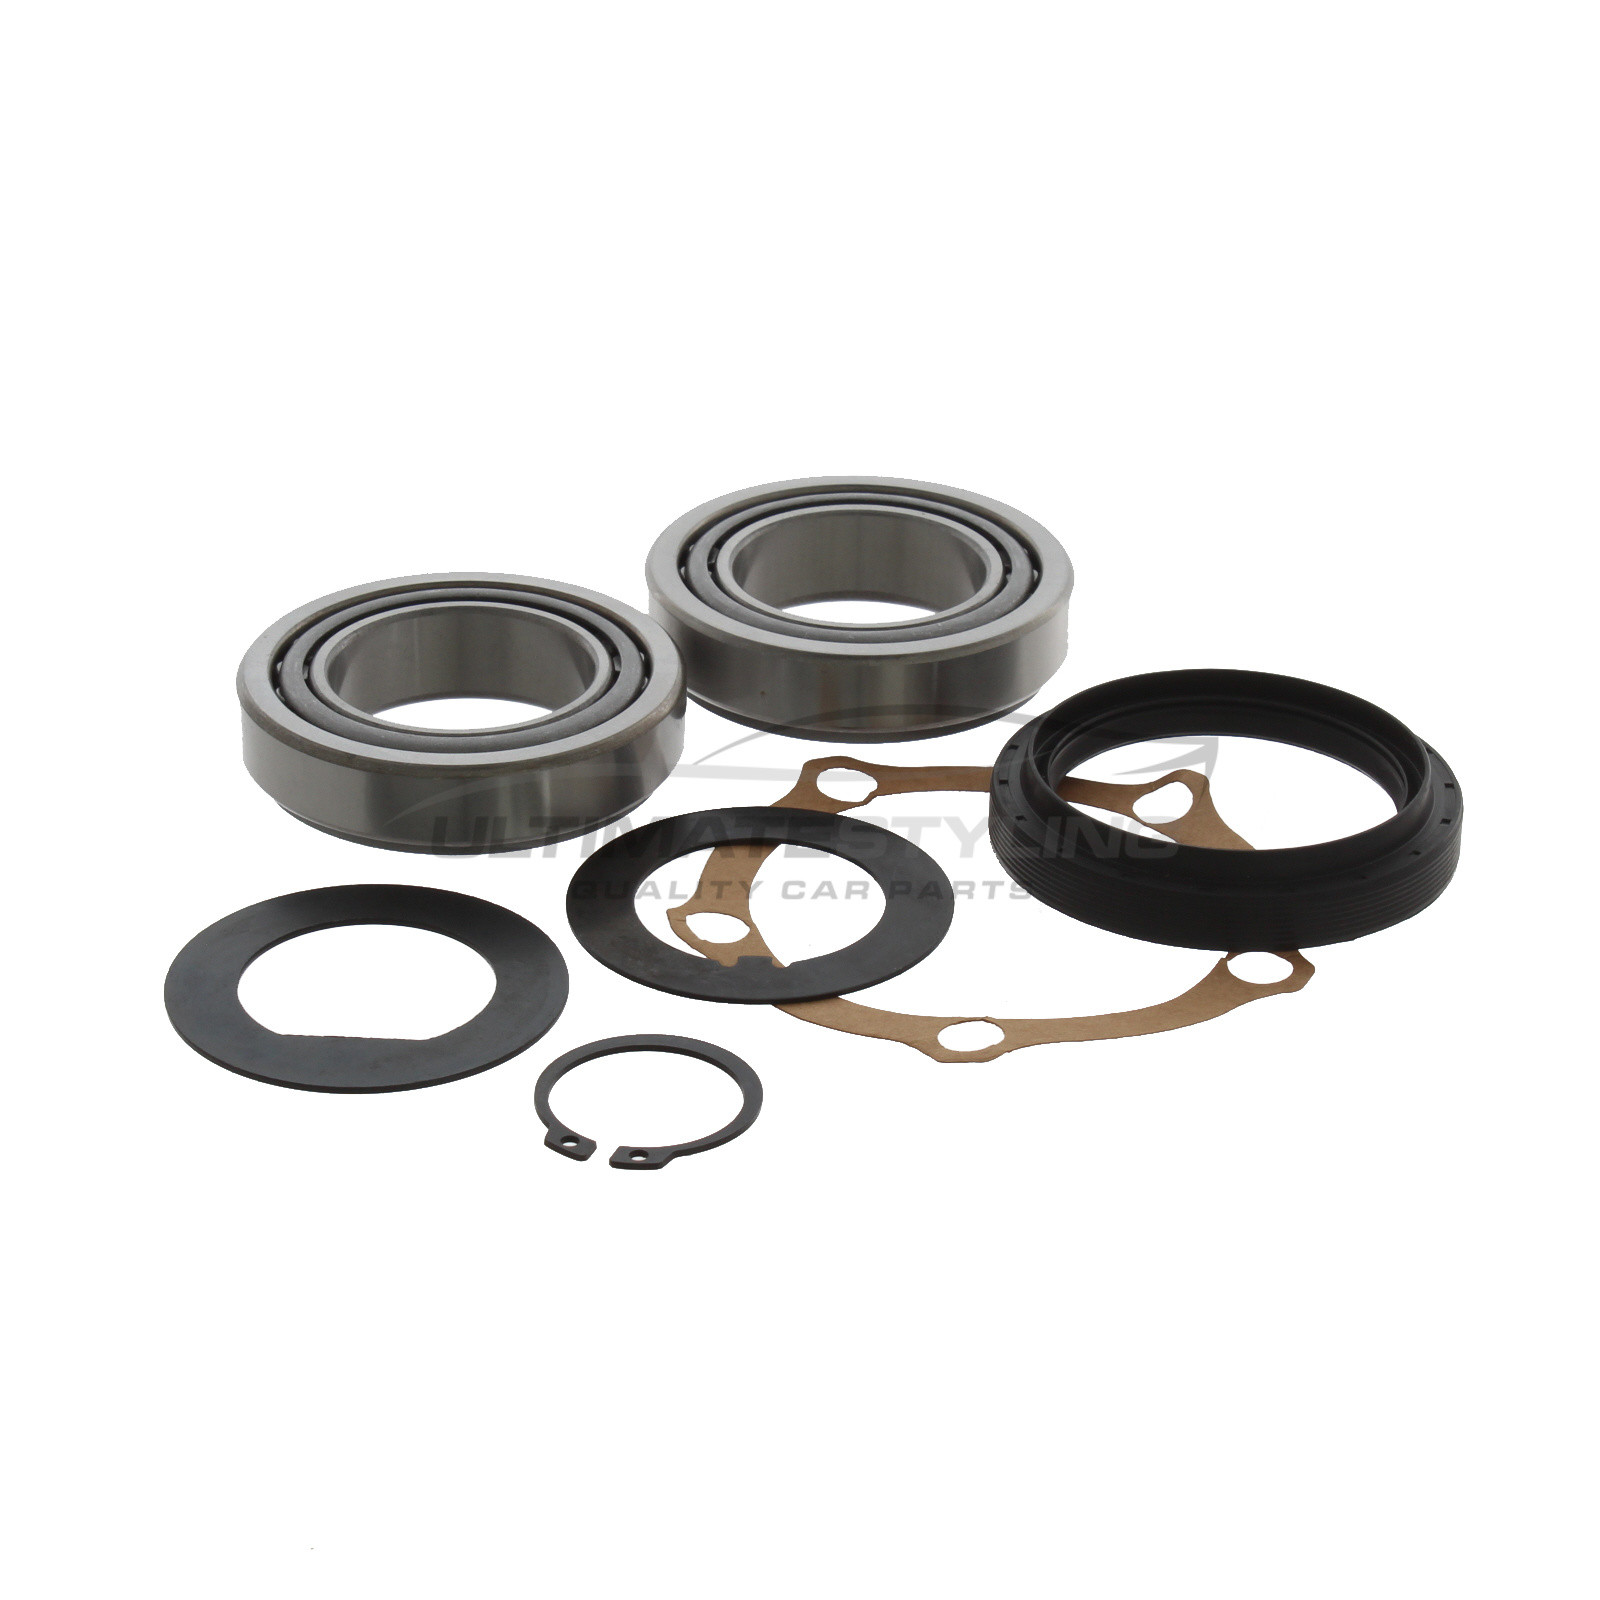 Front <span style="color:red;"><strong>OR</strong></span> Rear Wheel Bearing Kit for Land Rover Land Rover